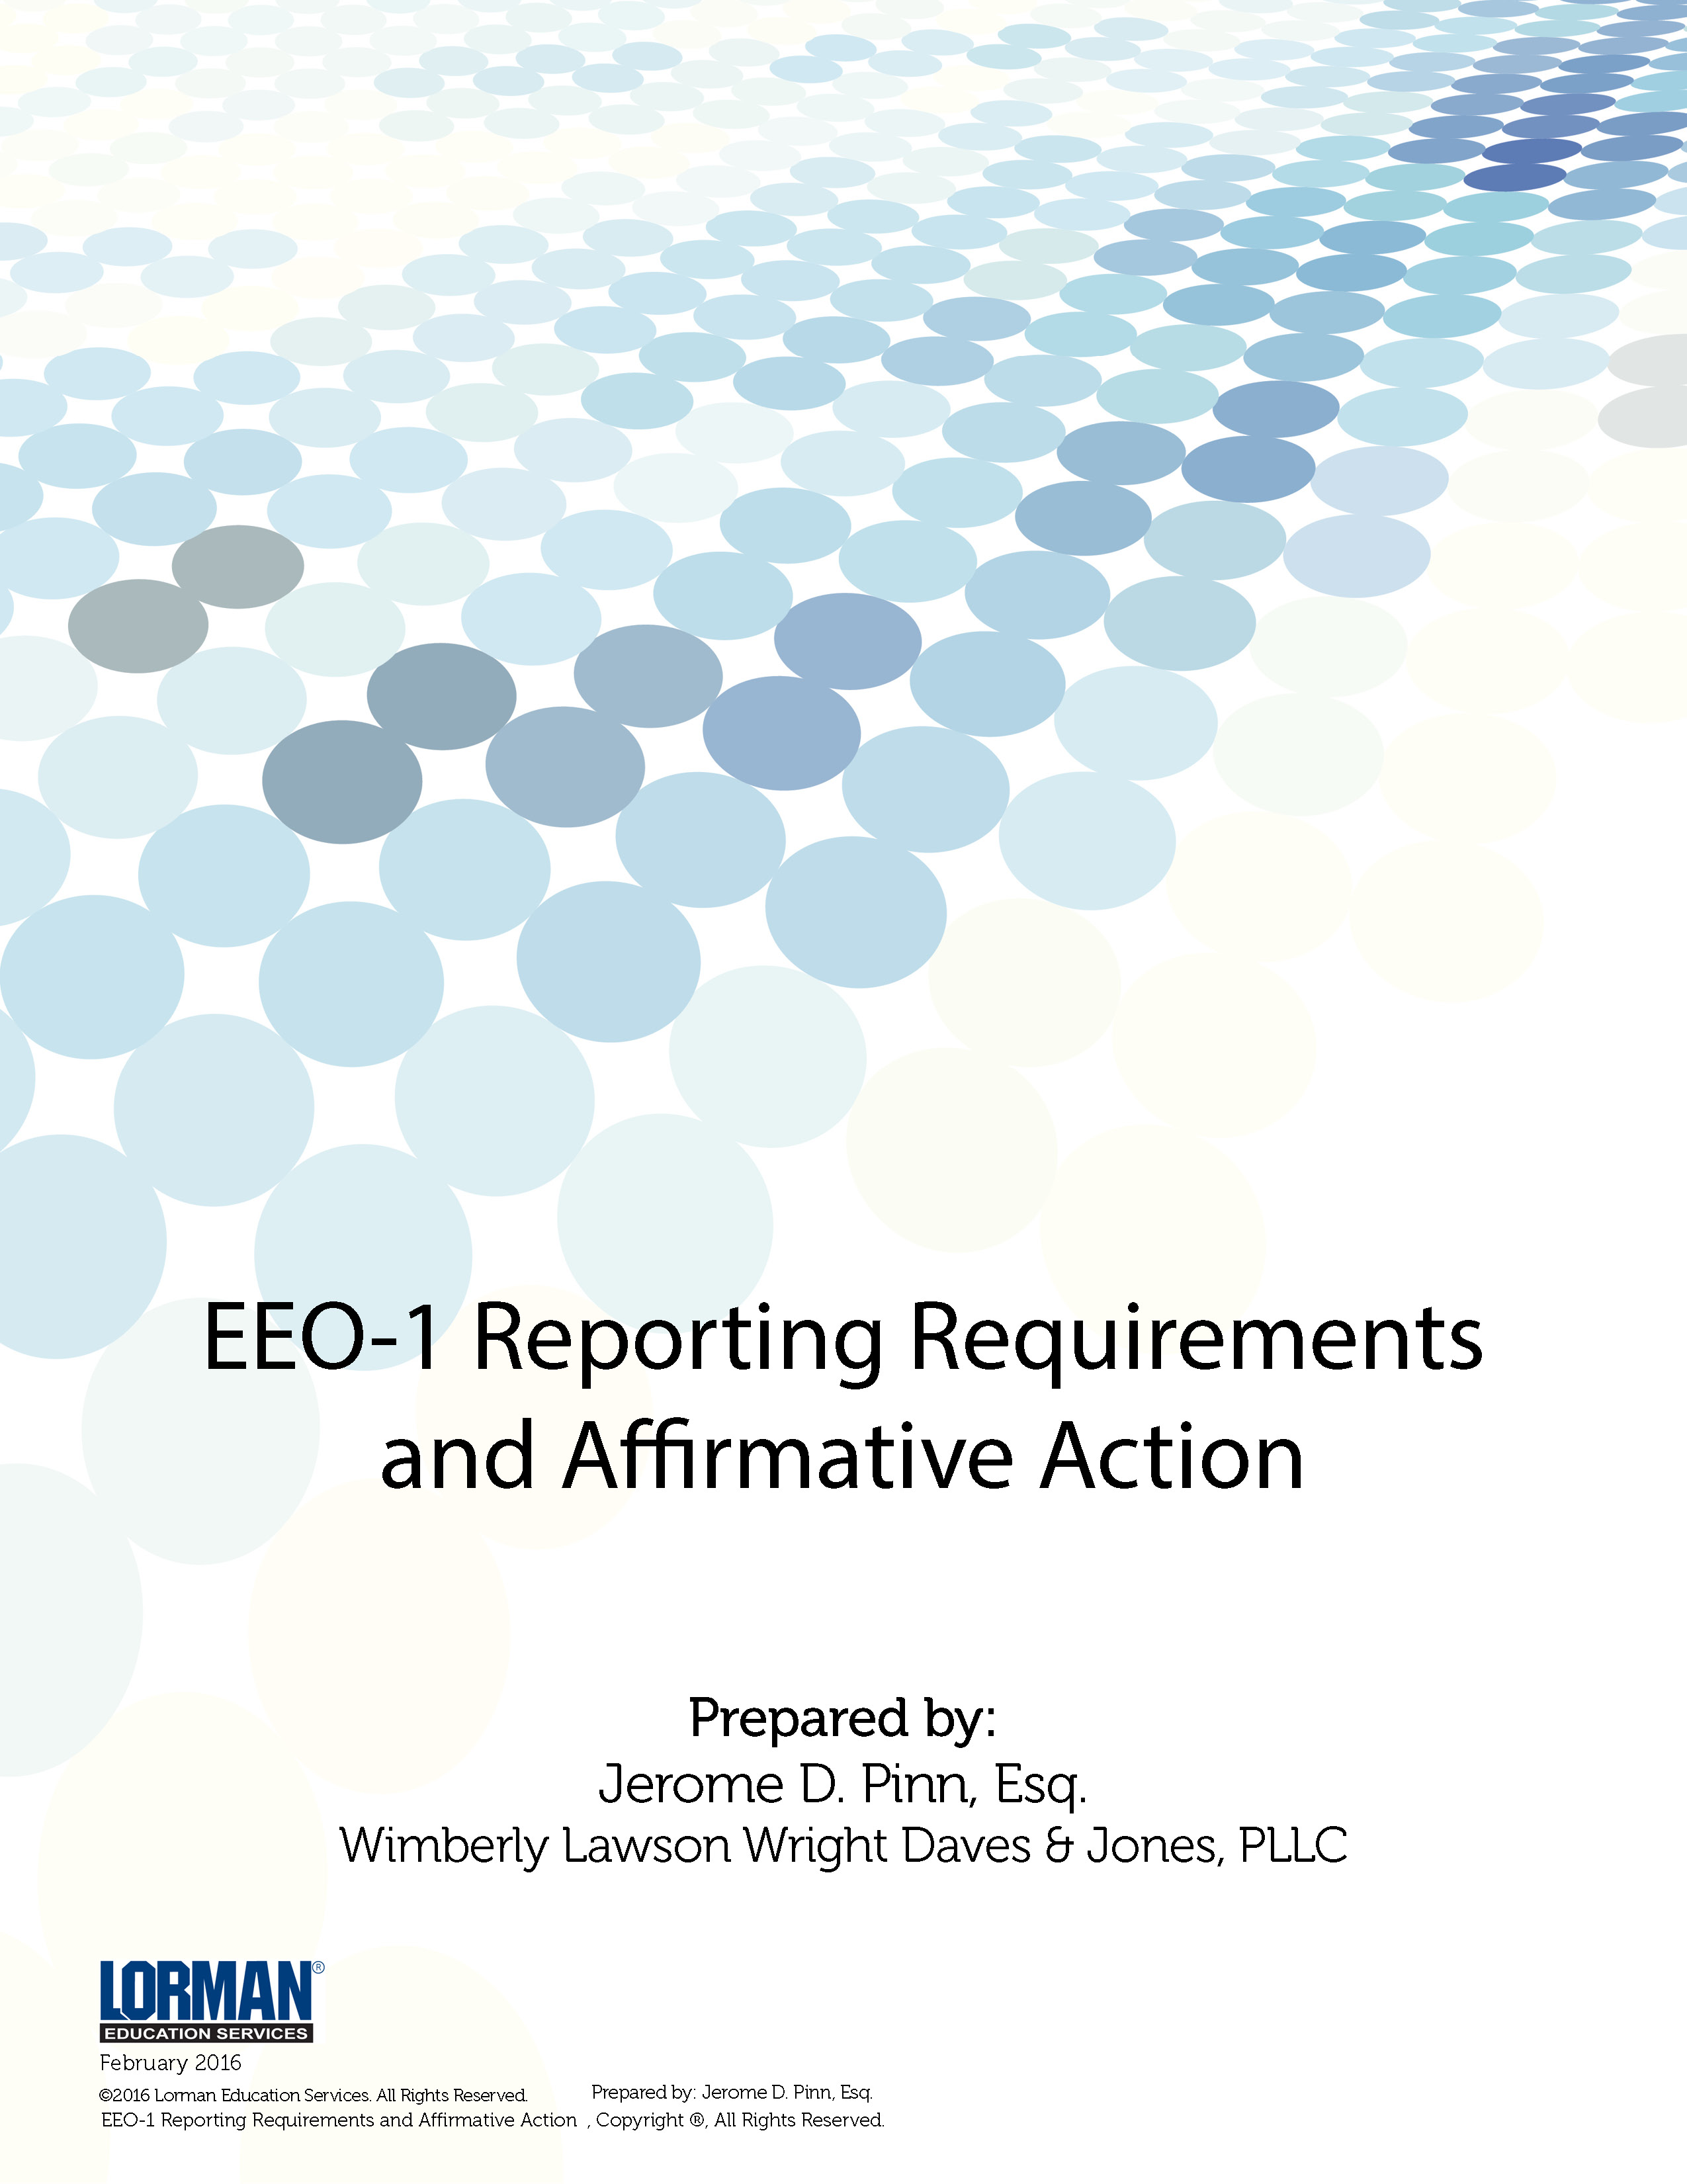 EEO-1 Reporting Requirements and Affirmative Action 